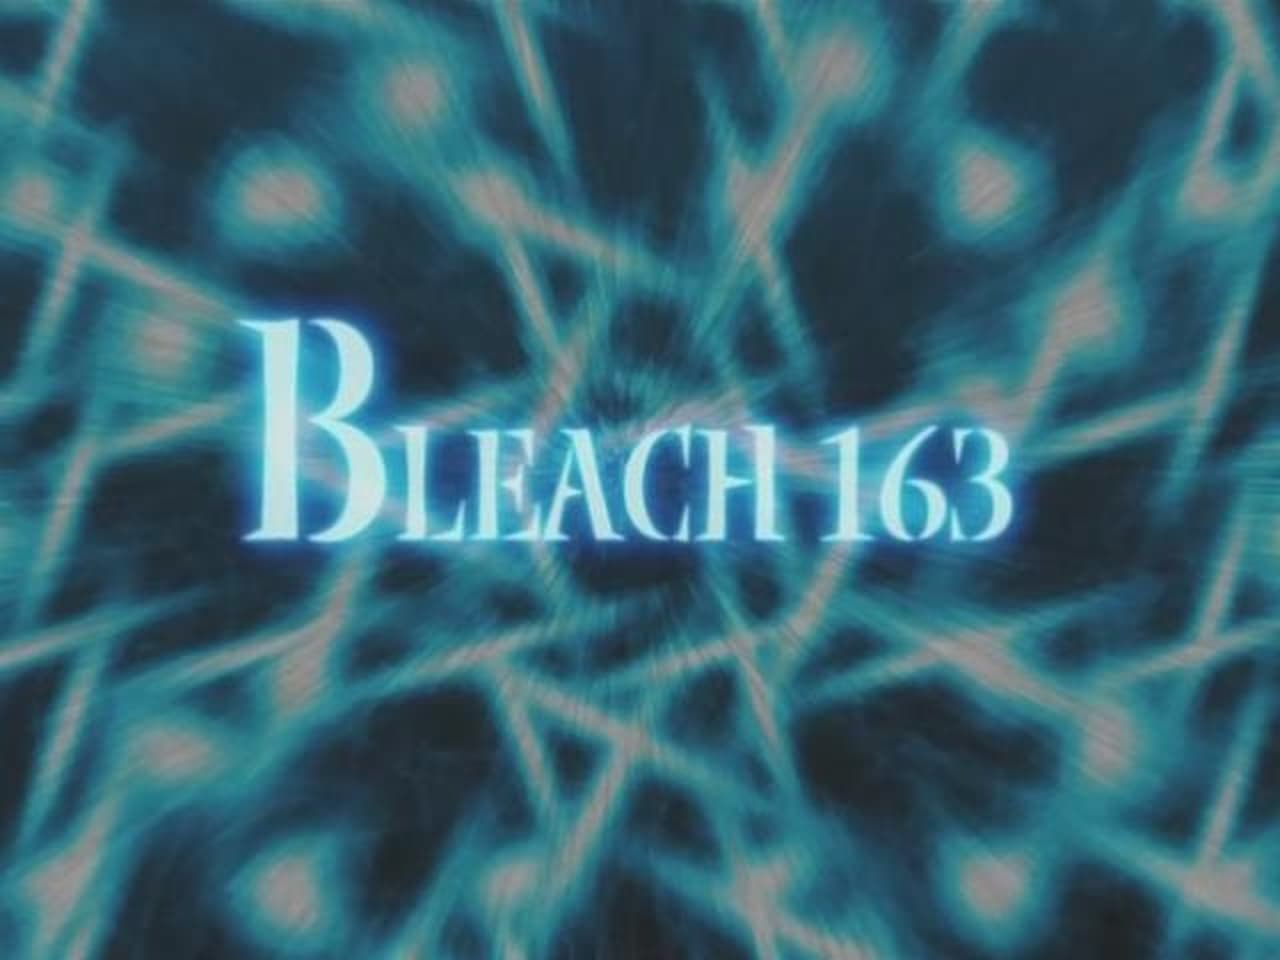 Bleach - Season 1 Episode 163 : Shinigami and Quincy, The Battle with Madness